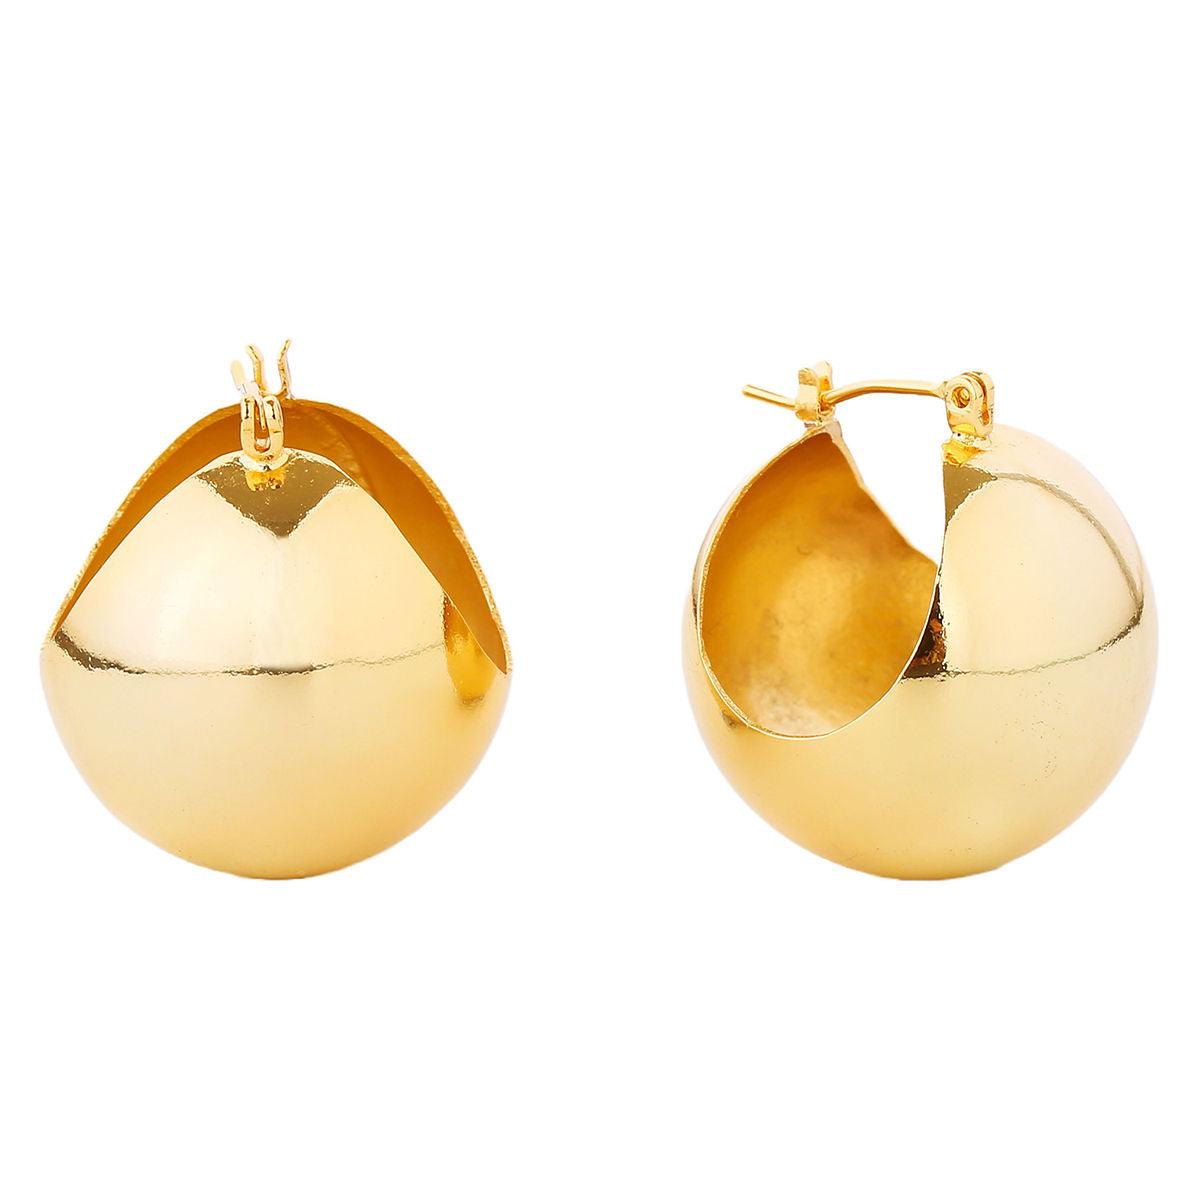 Shine Bright: Stunning Large Gold Finish Wide Ball Earrings